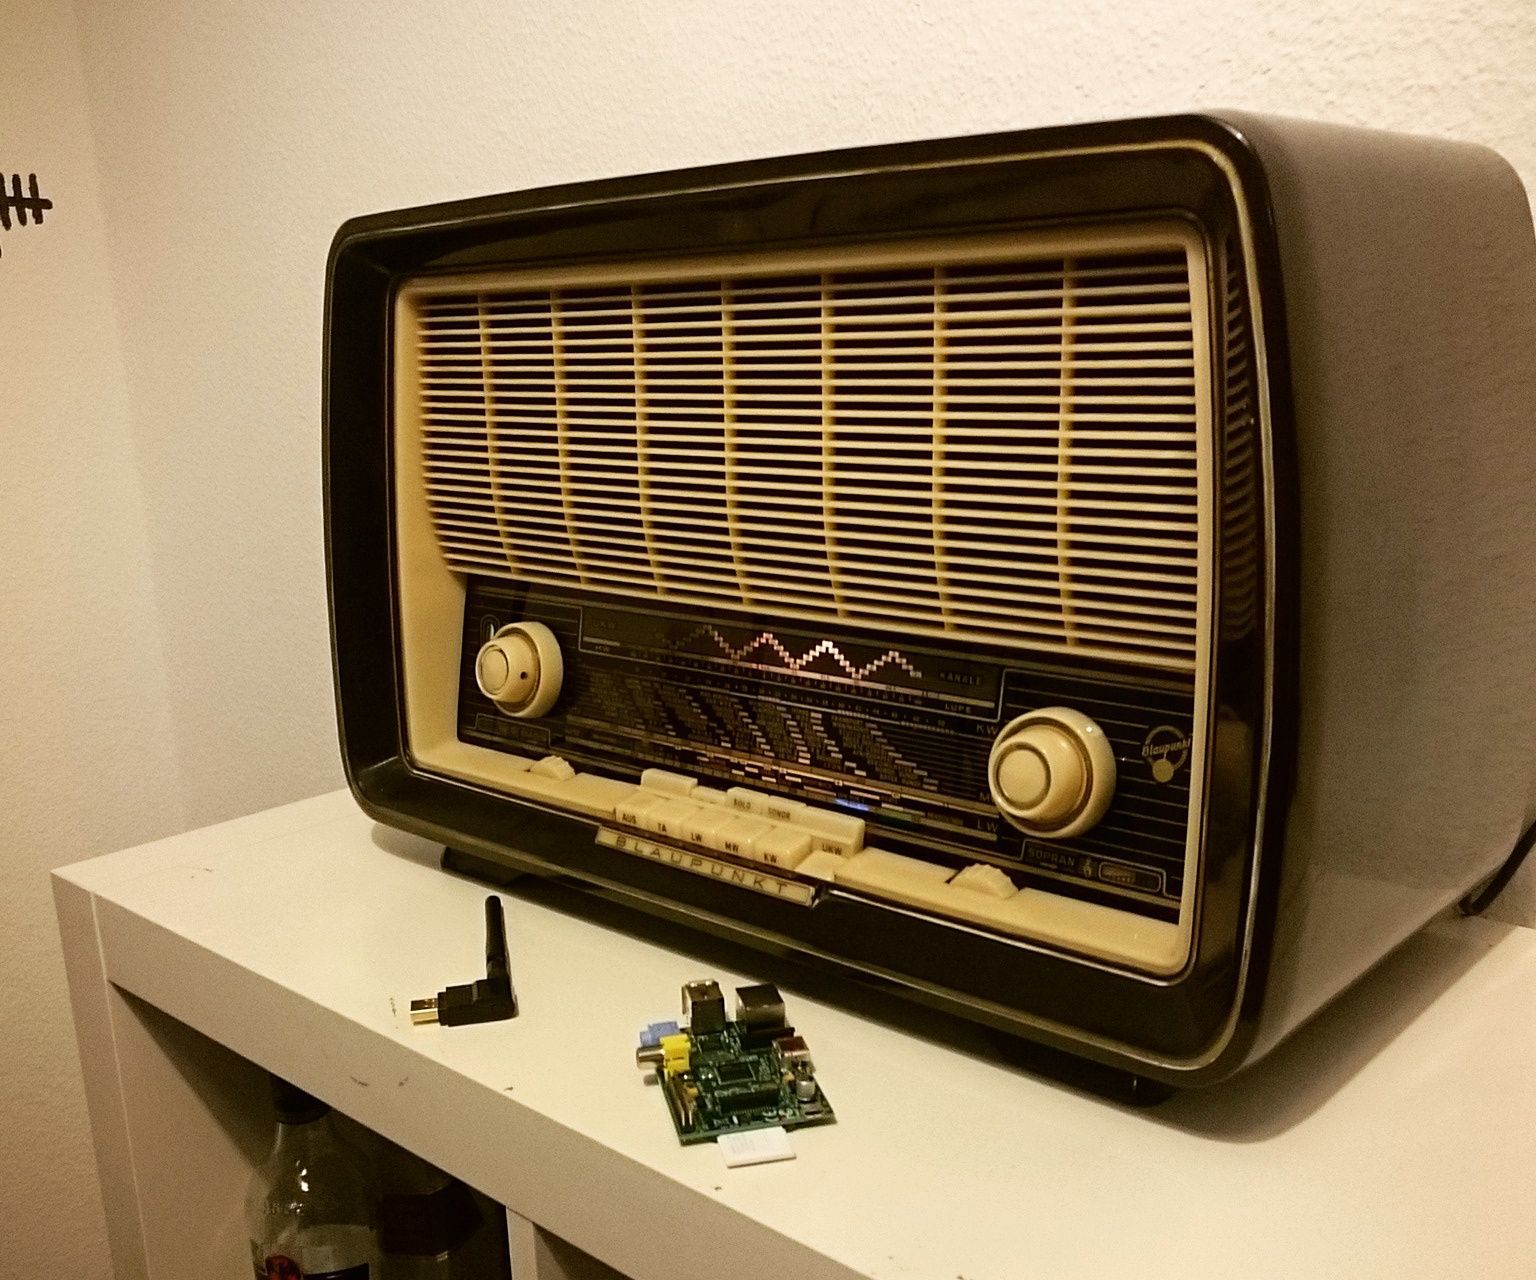 Converting an Old Radio Into a Spotify Streaming Box